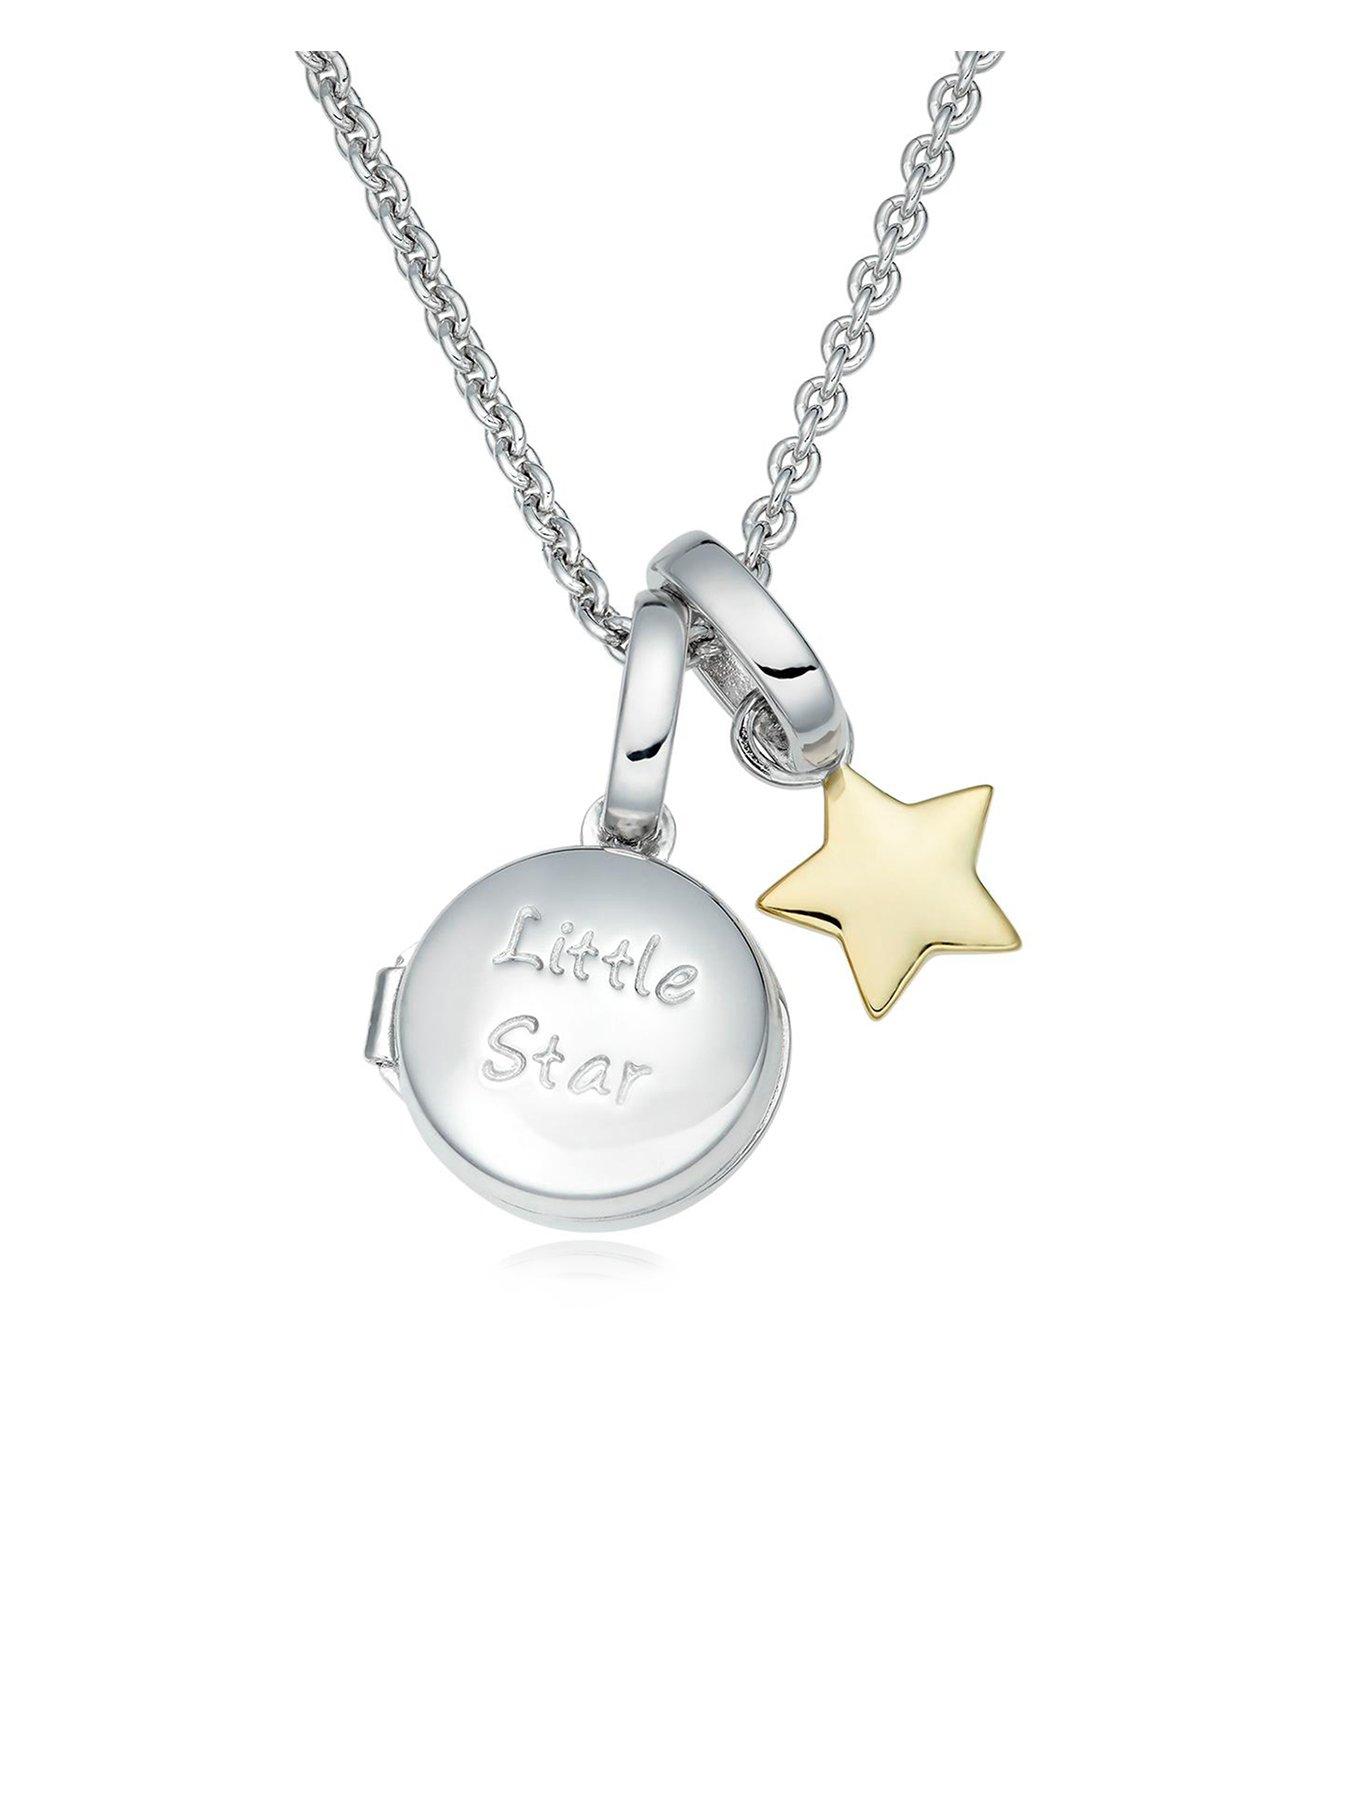 Mens | Necklaces | Gifts & jewellery | www.littlewoods.com